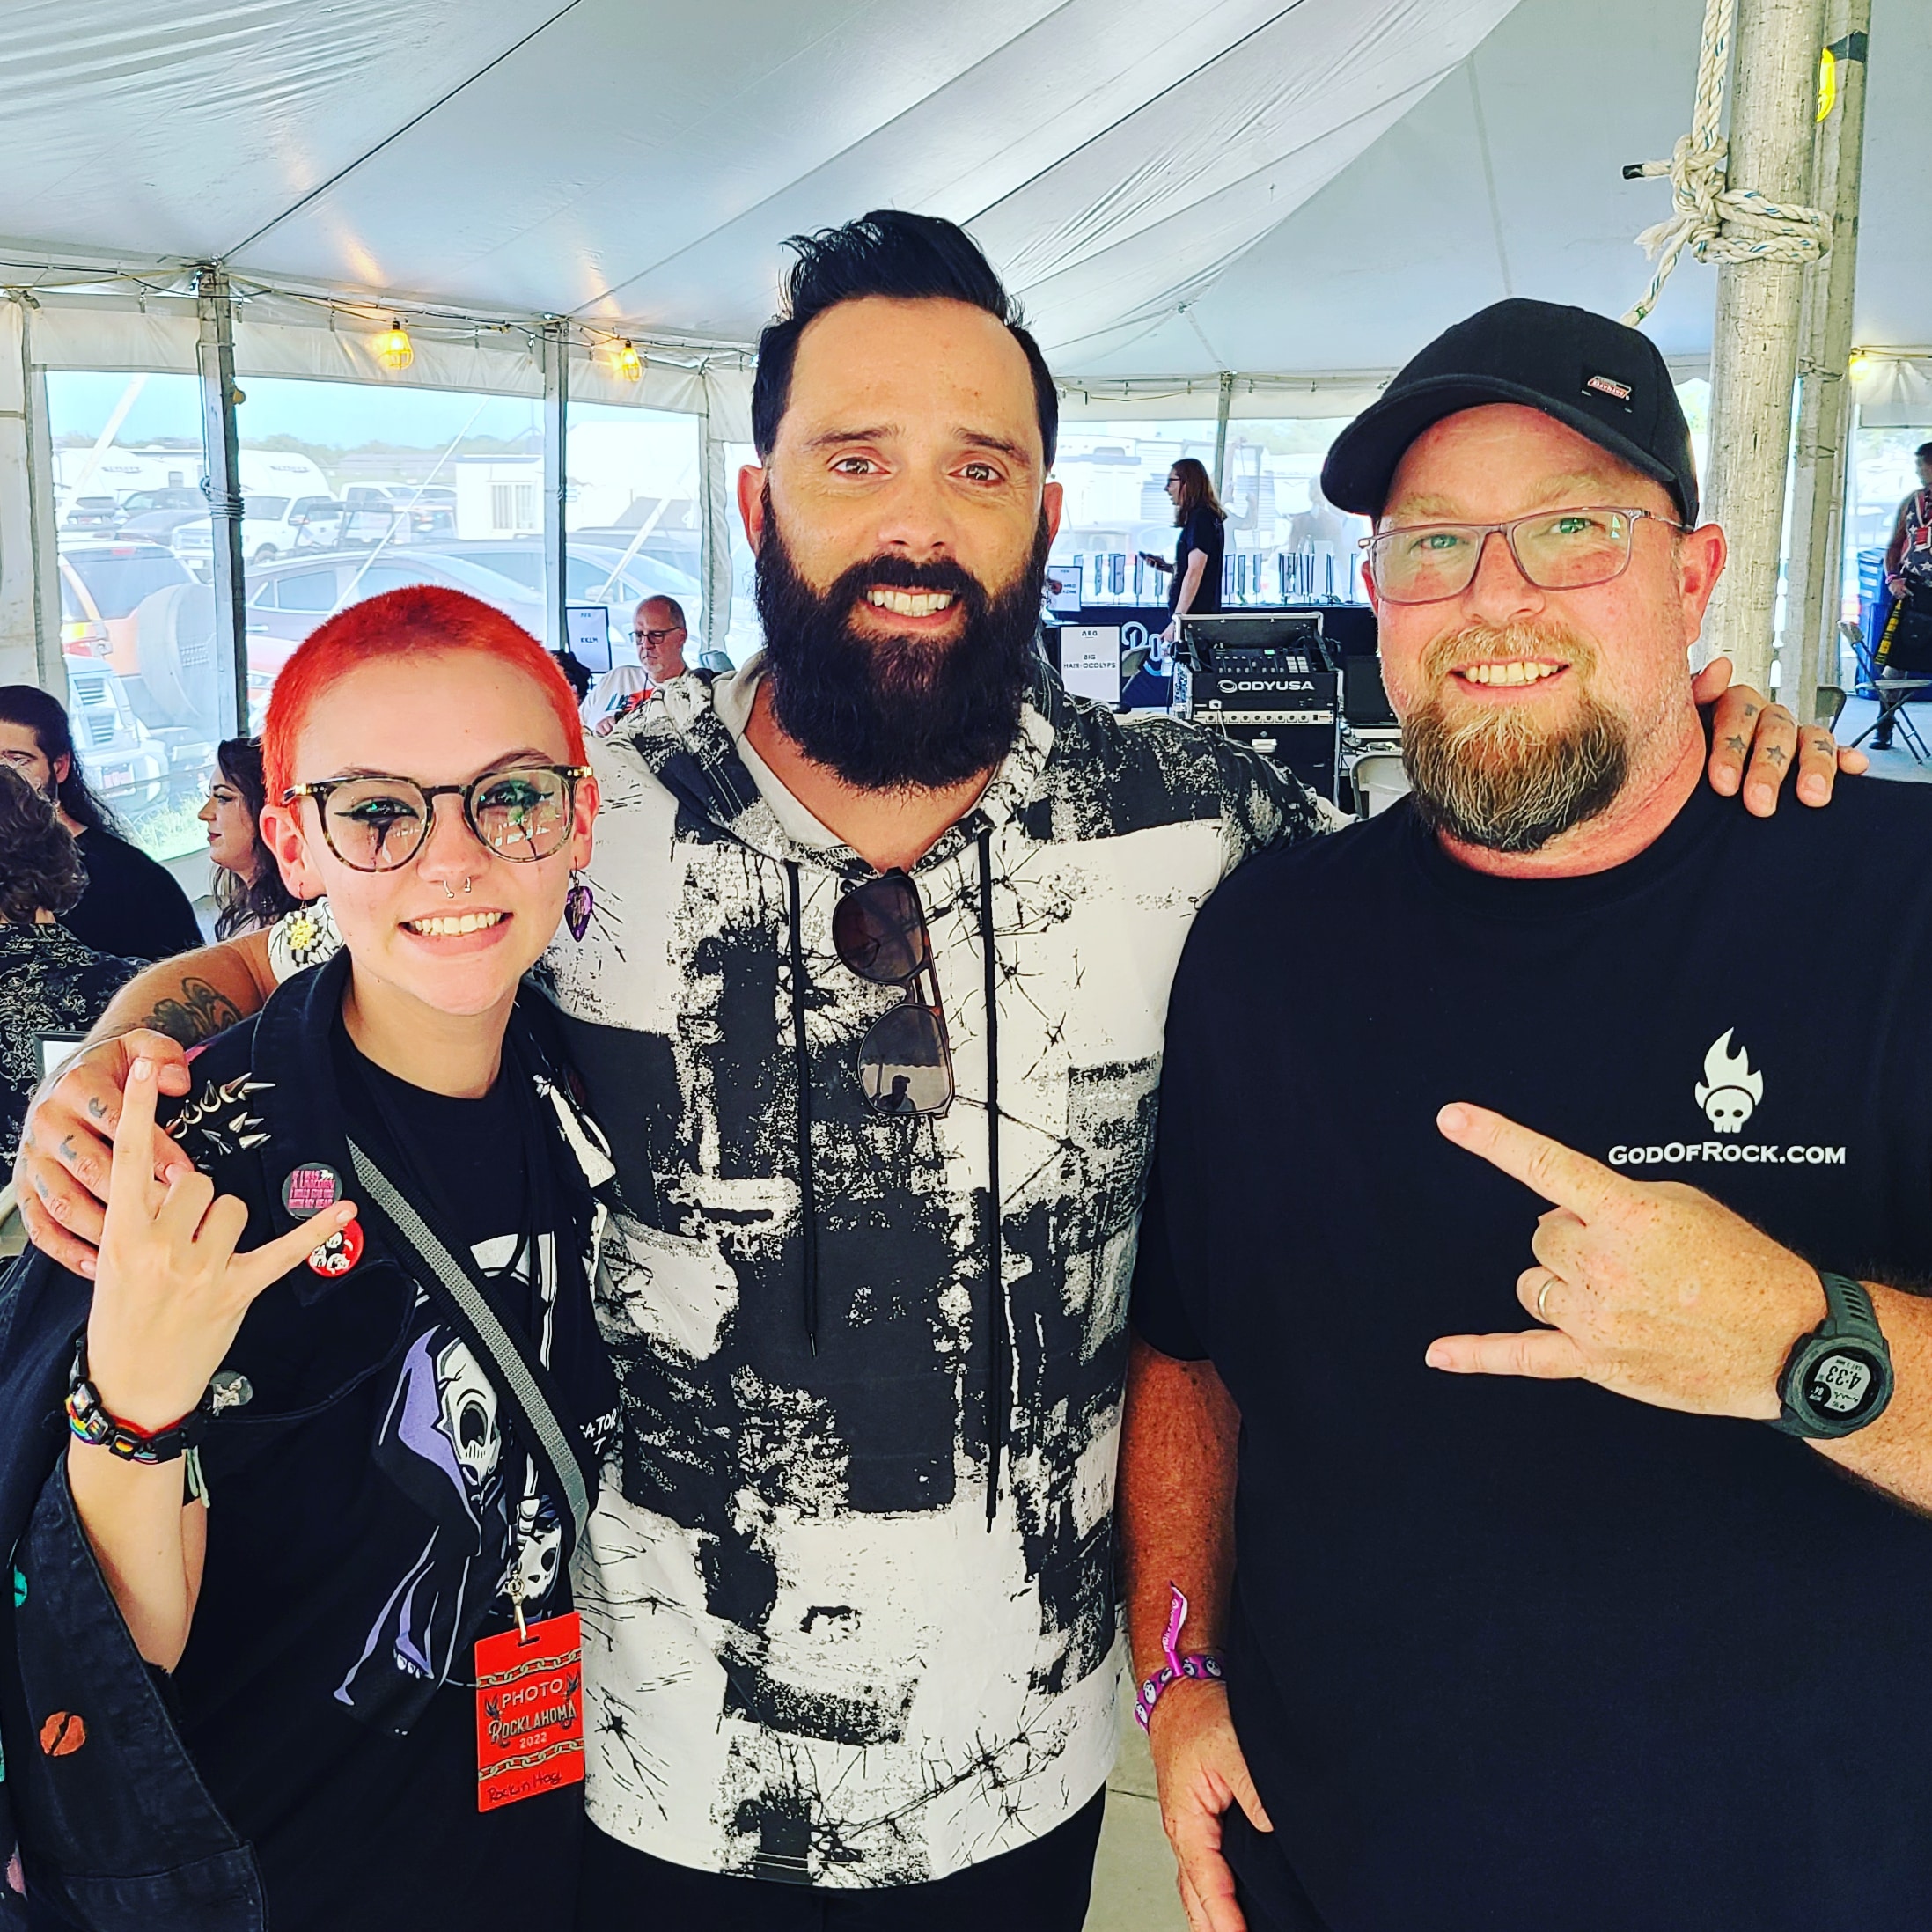 John Cooper from Skillet backstage at Rocklahoma